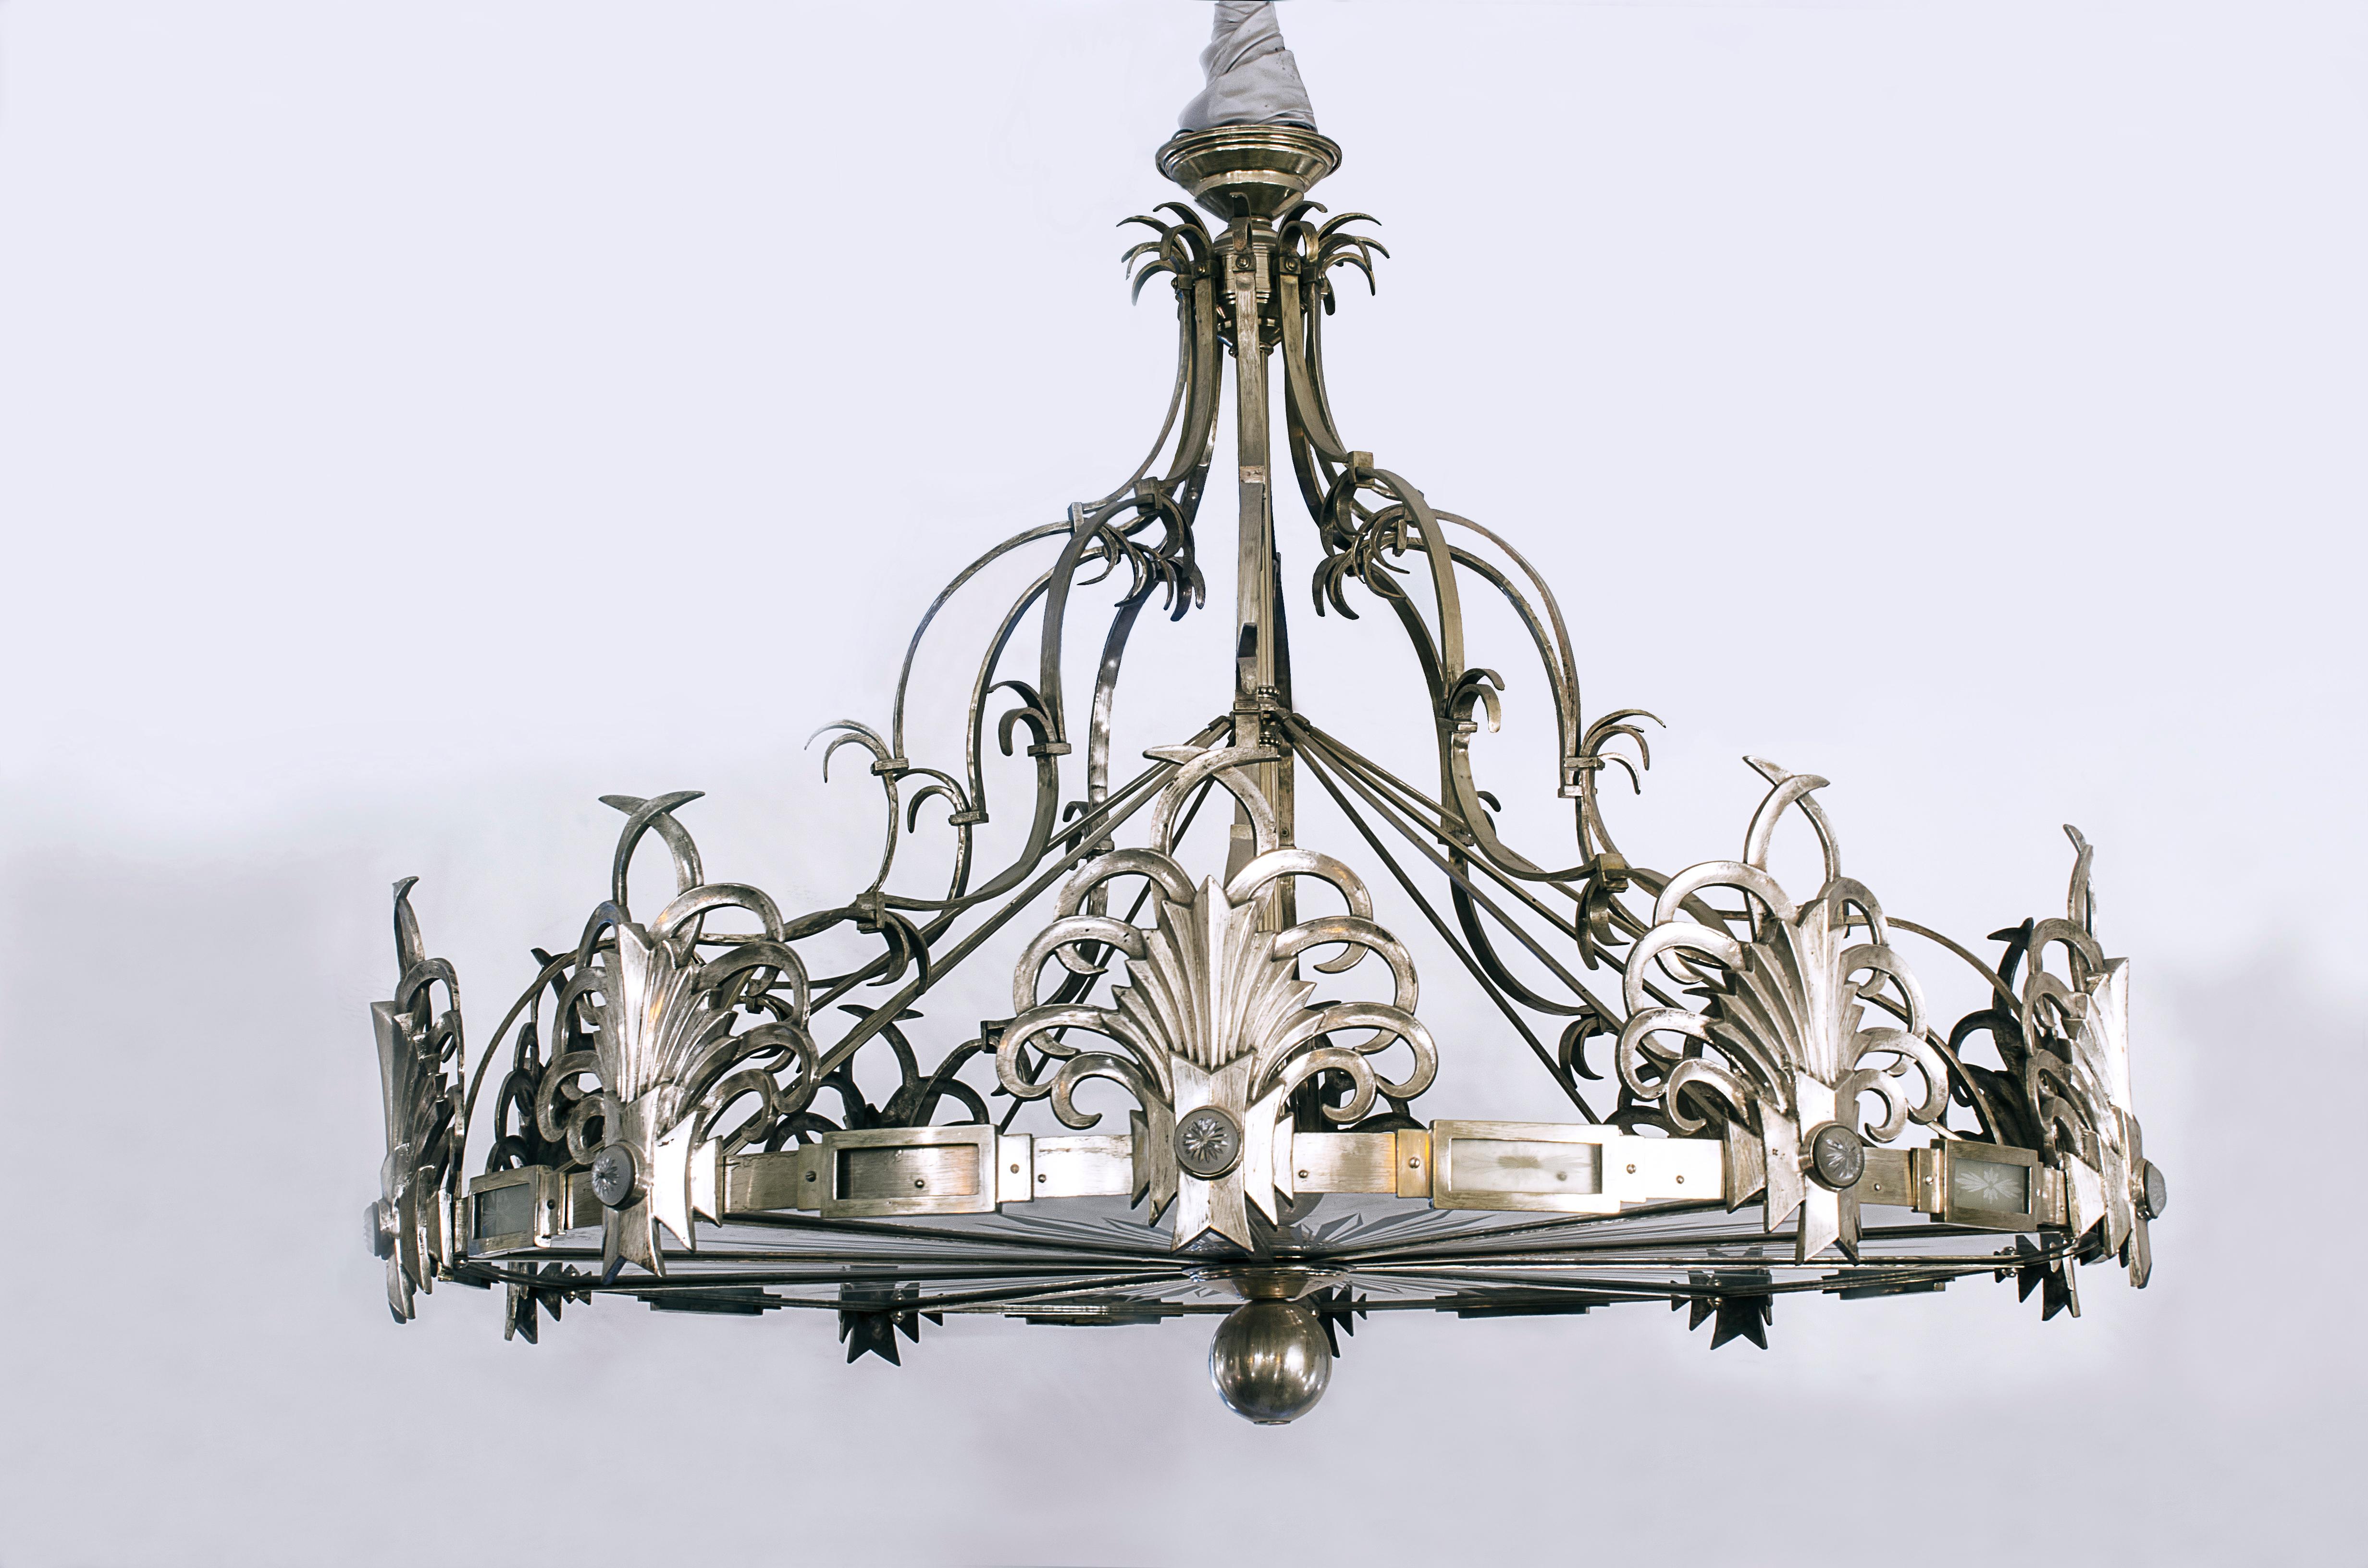 Art Deco chandelier made of bronze, silver plated with acid etched glass and carved glass on the outside.

It belonged to the “Ex Cine Teatro Opera” of Lanús. The cinema worked in the 50s, located in the former Av Pavón 4319, today Av. Hipolito